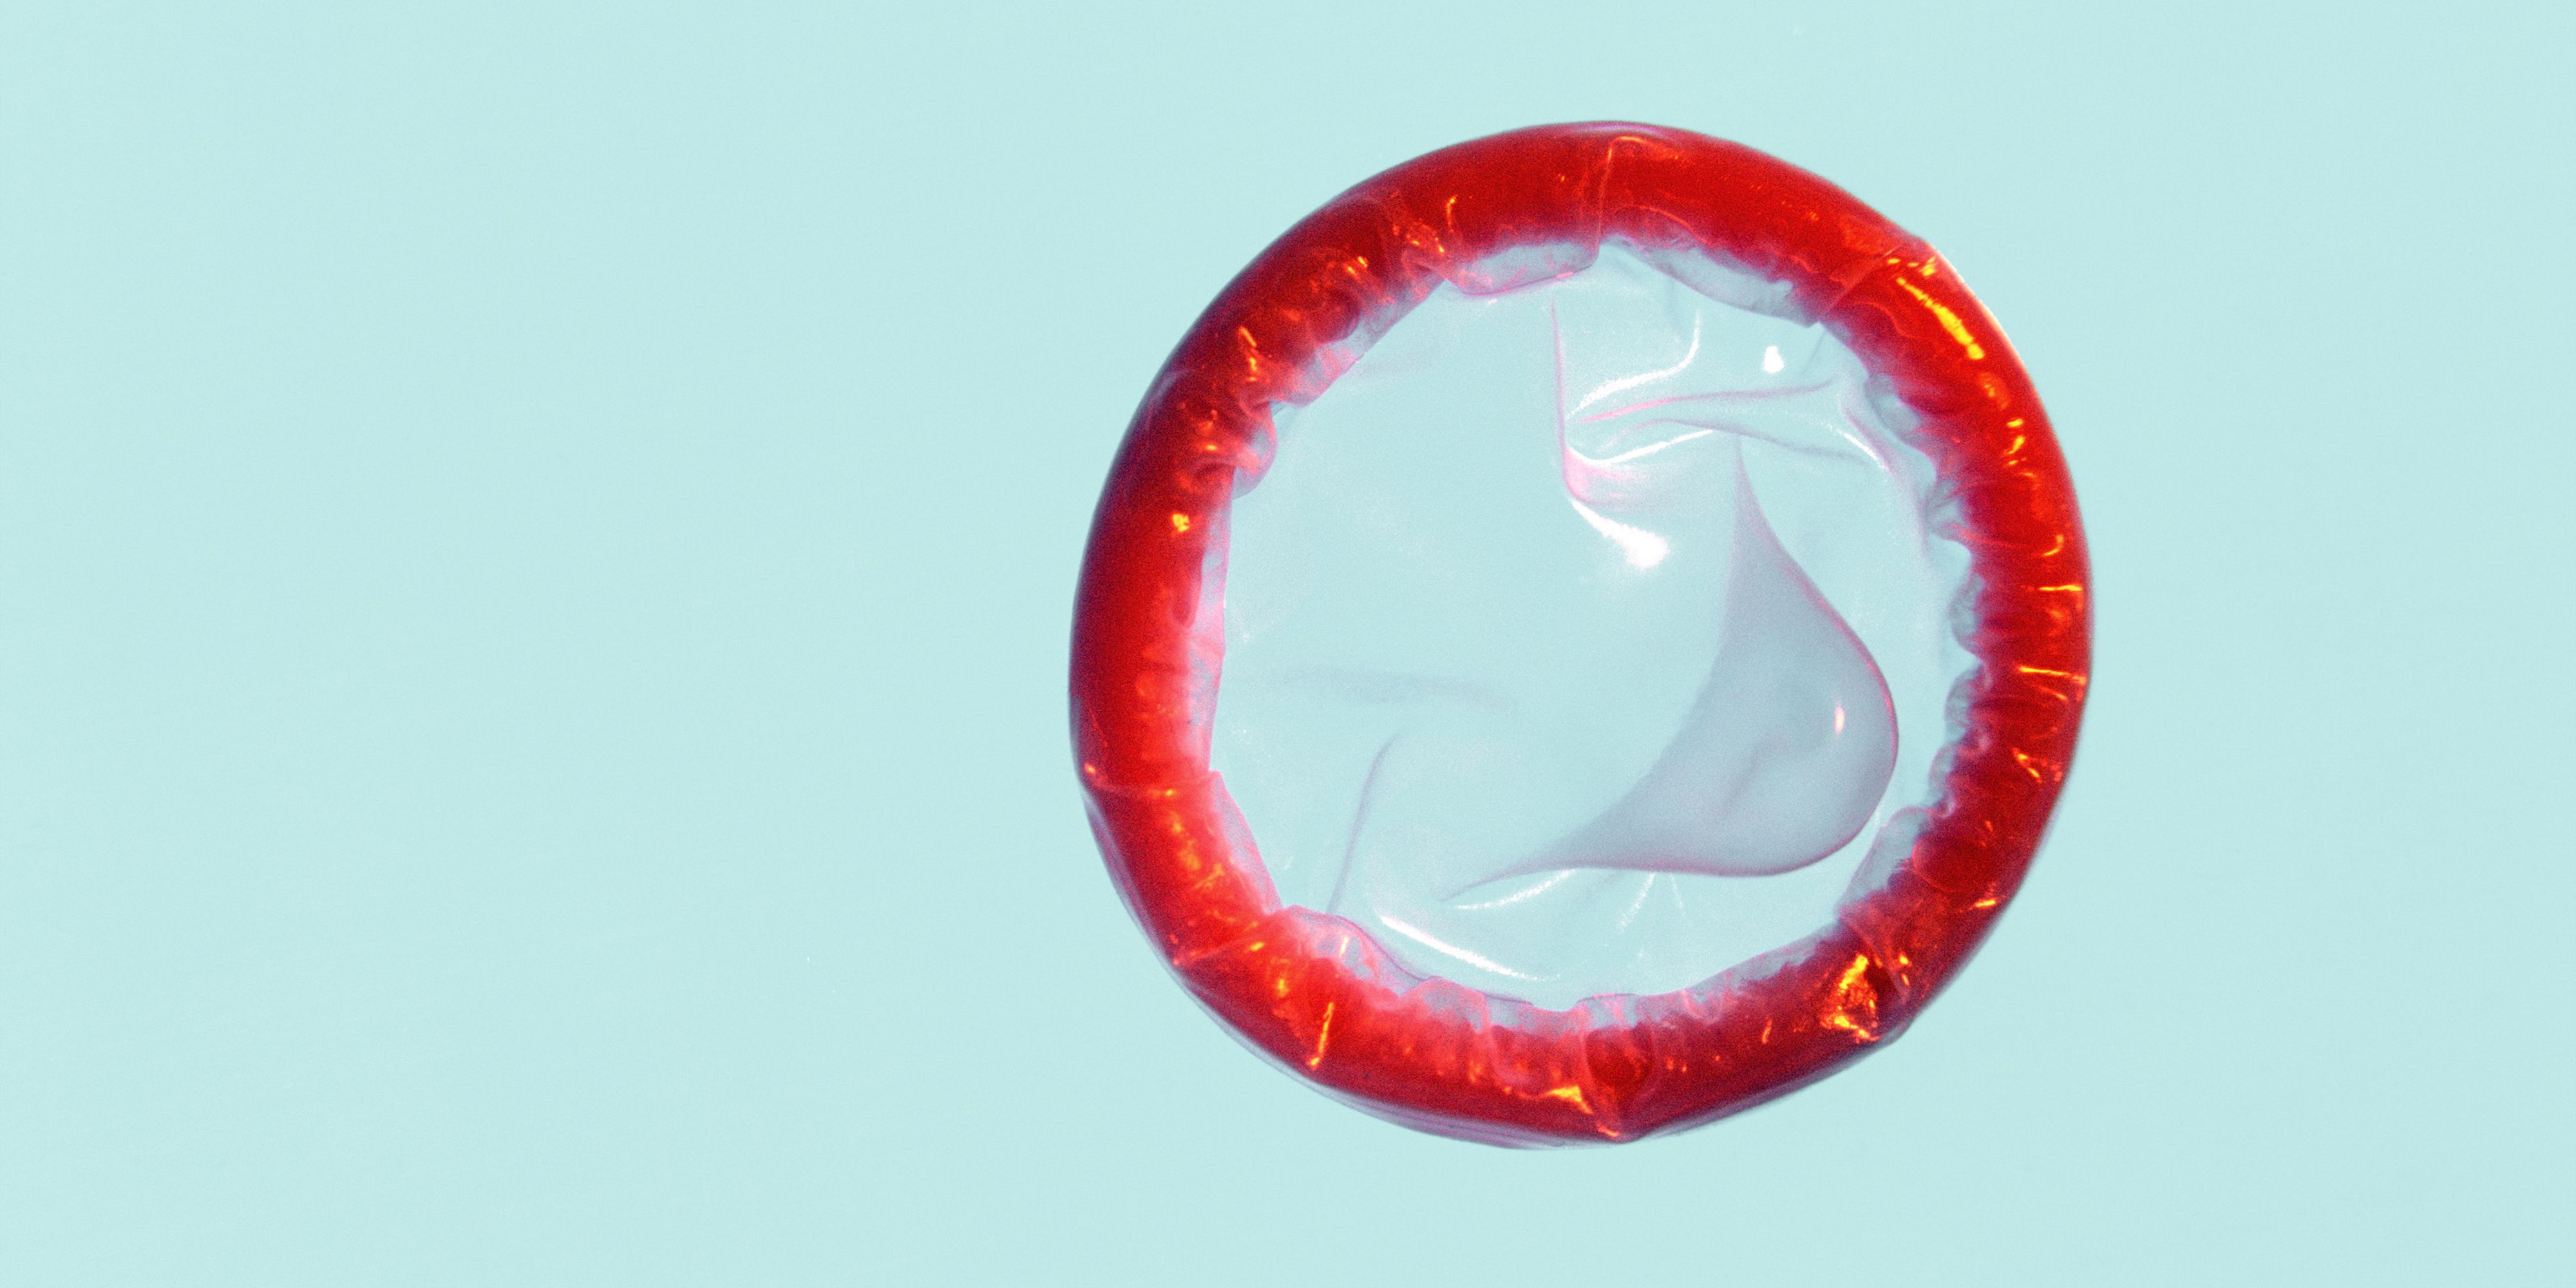 Is it safe to have unprotected sex immediately after my period? pic